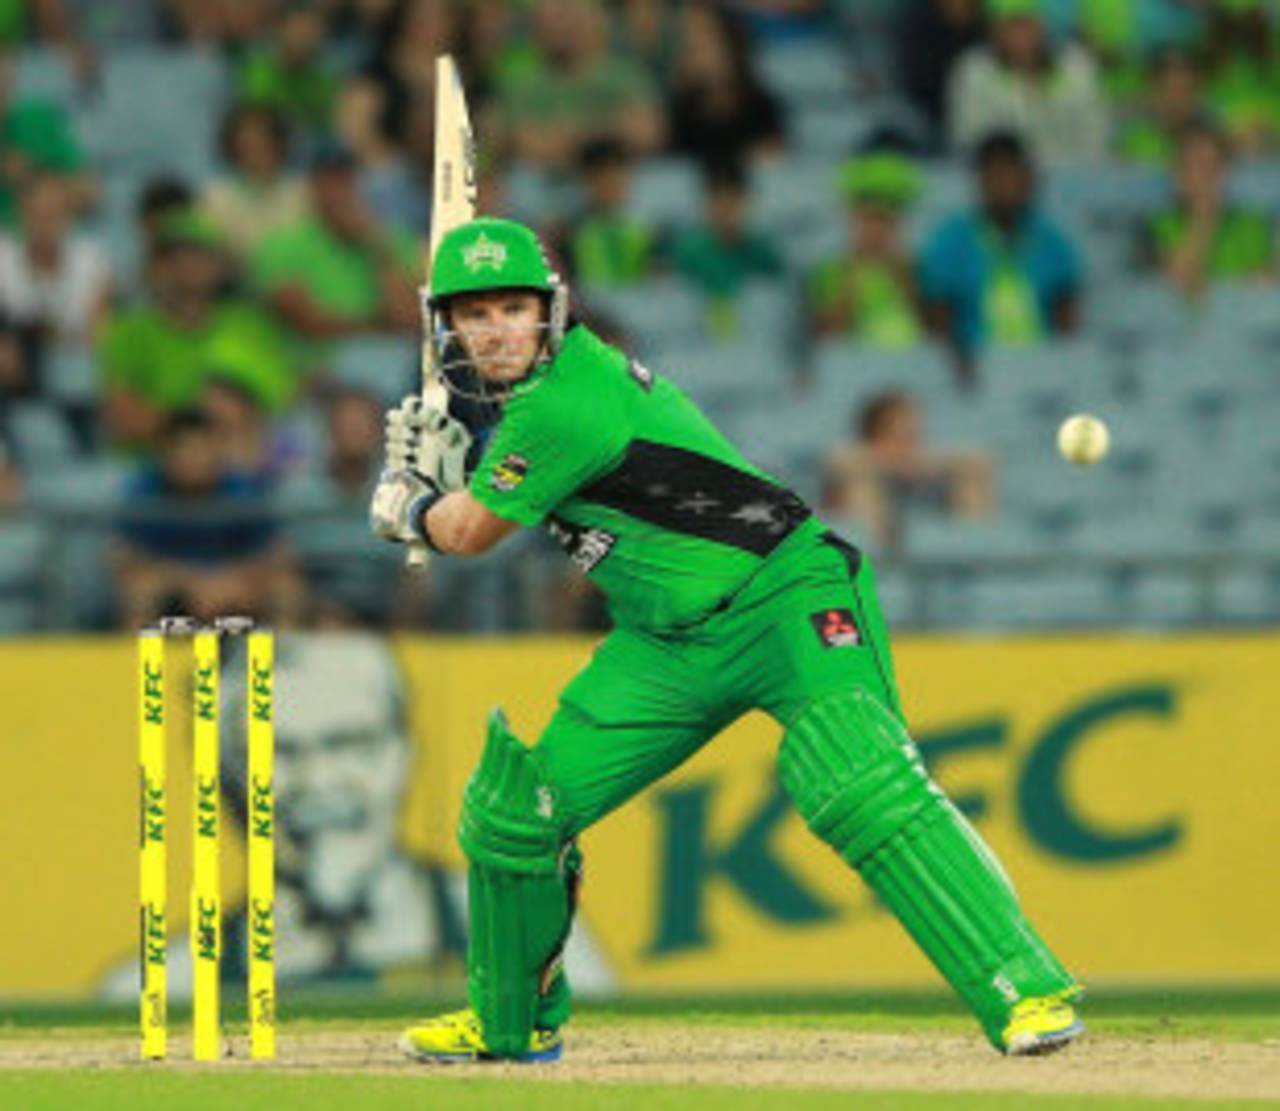 Brad Hodge lines up to play a shot during his innings of 64, Sydney Thunder v Melbourne Stars, Big Bash League 2013-14, Sydney, January 1, 2014